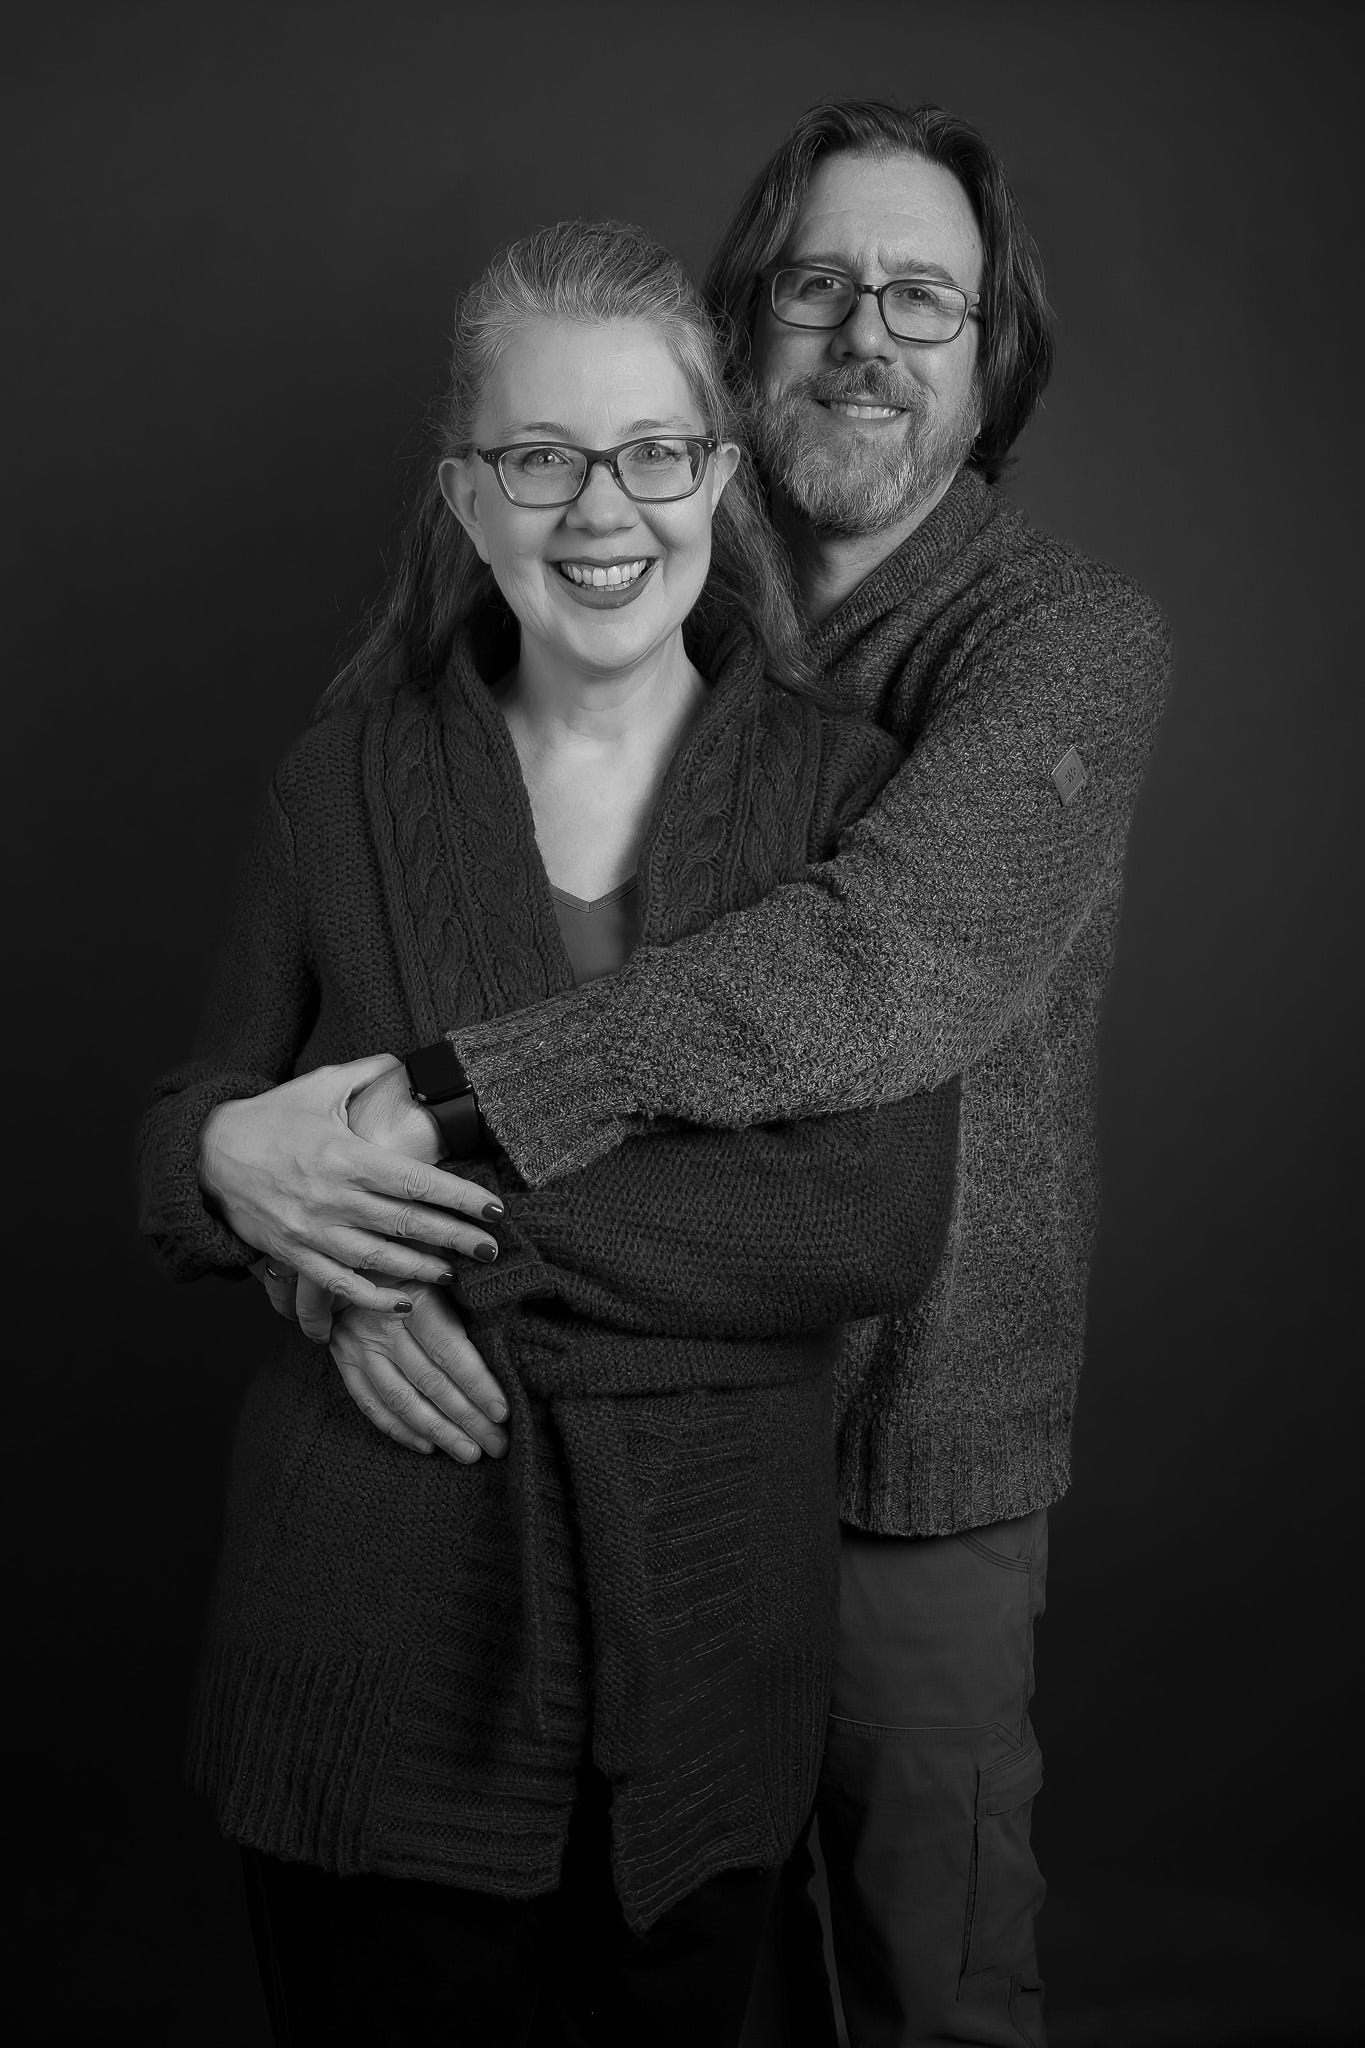 Black and white photo of a man and woman, with the man's arms around her.